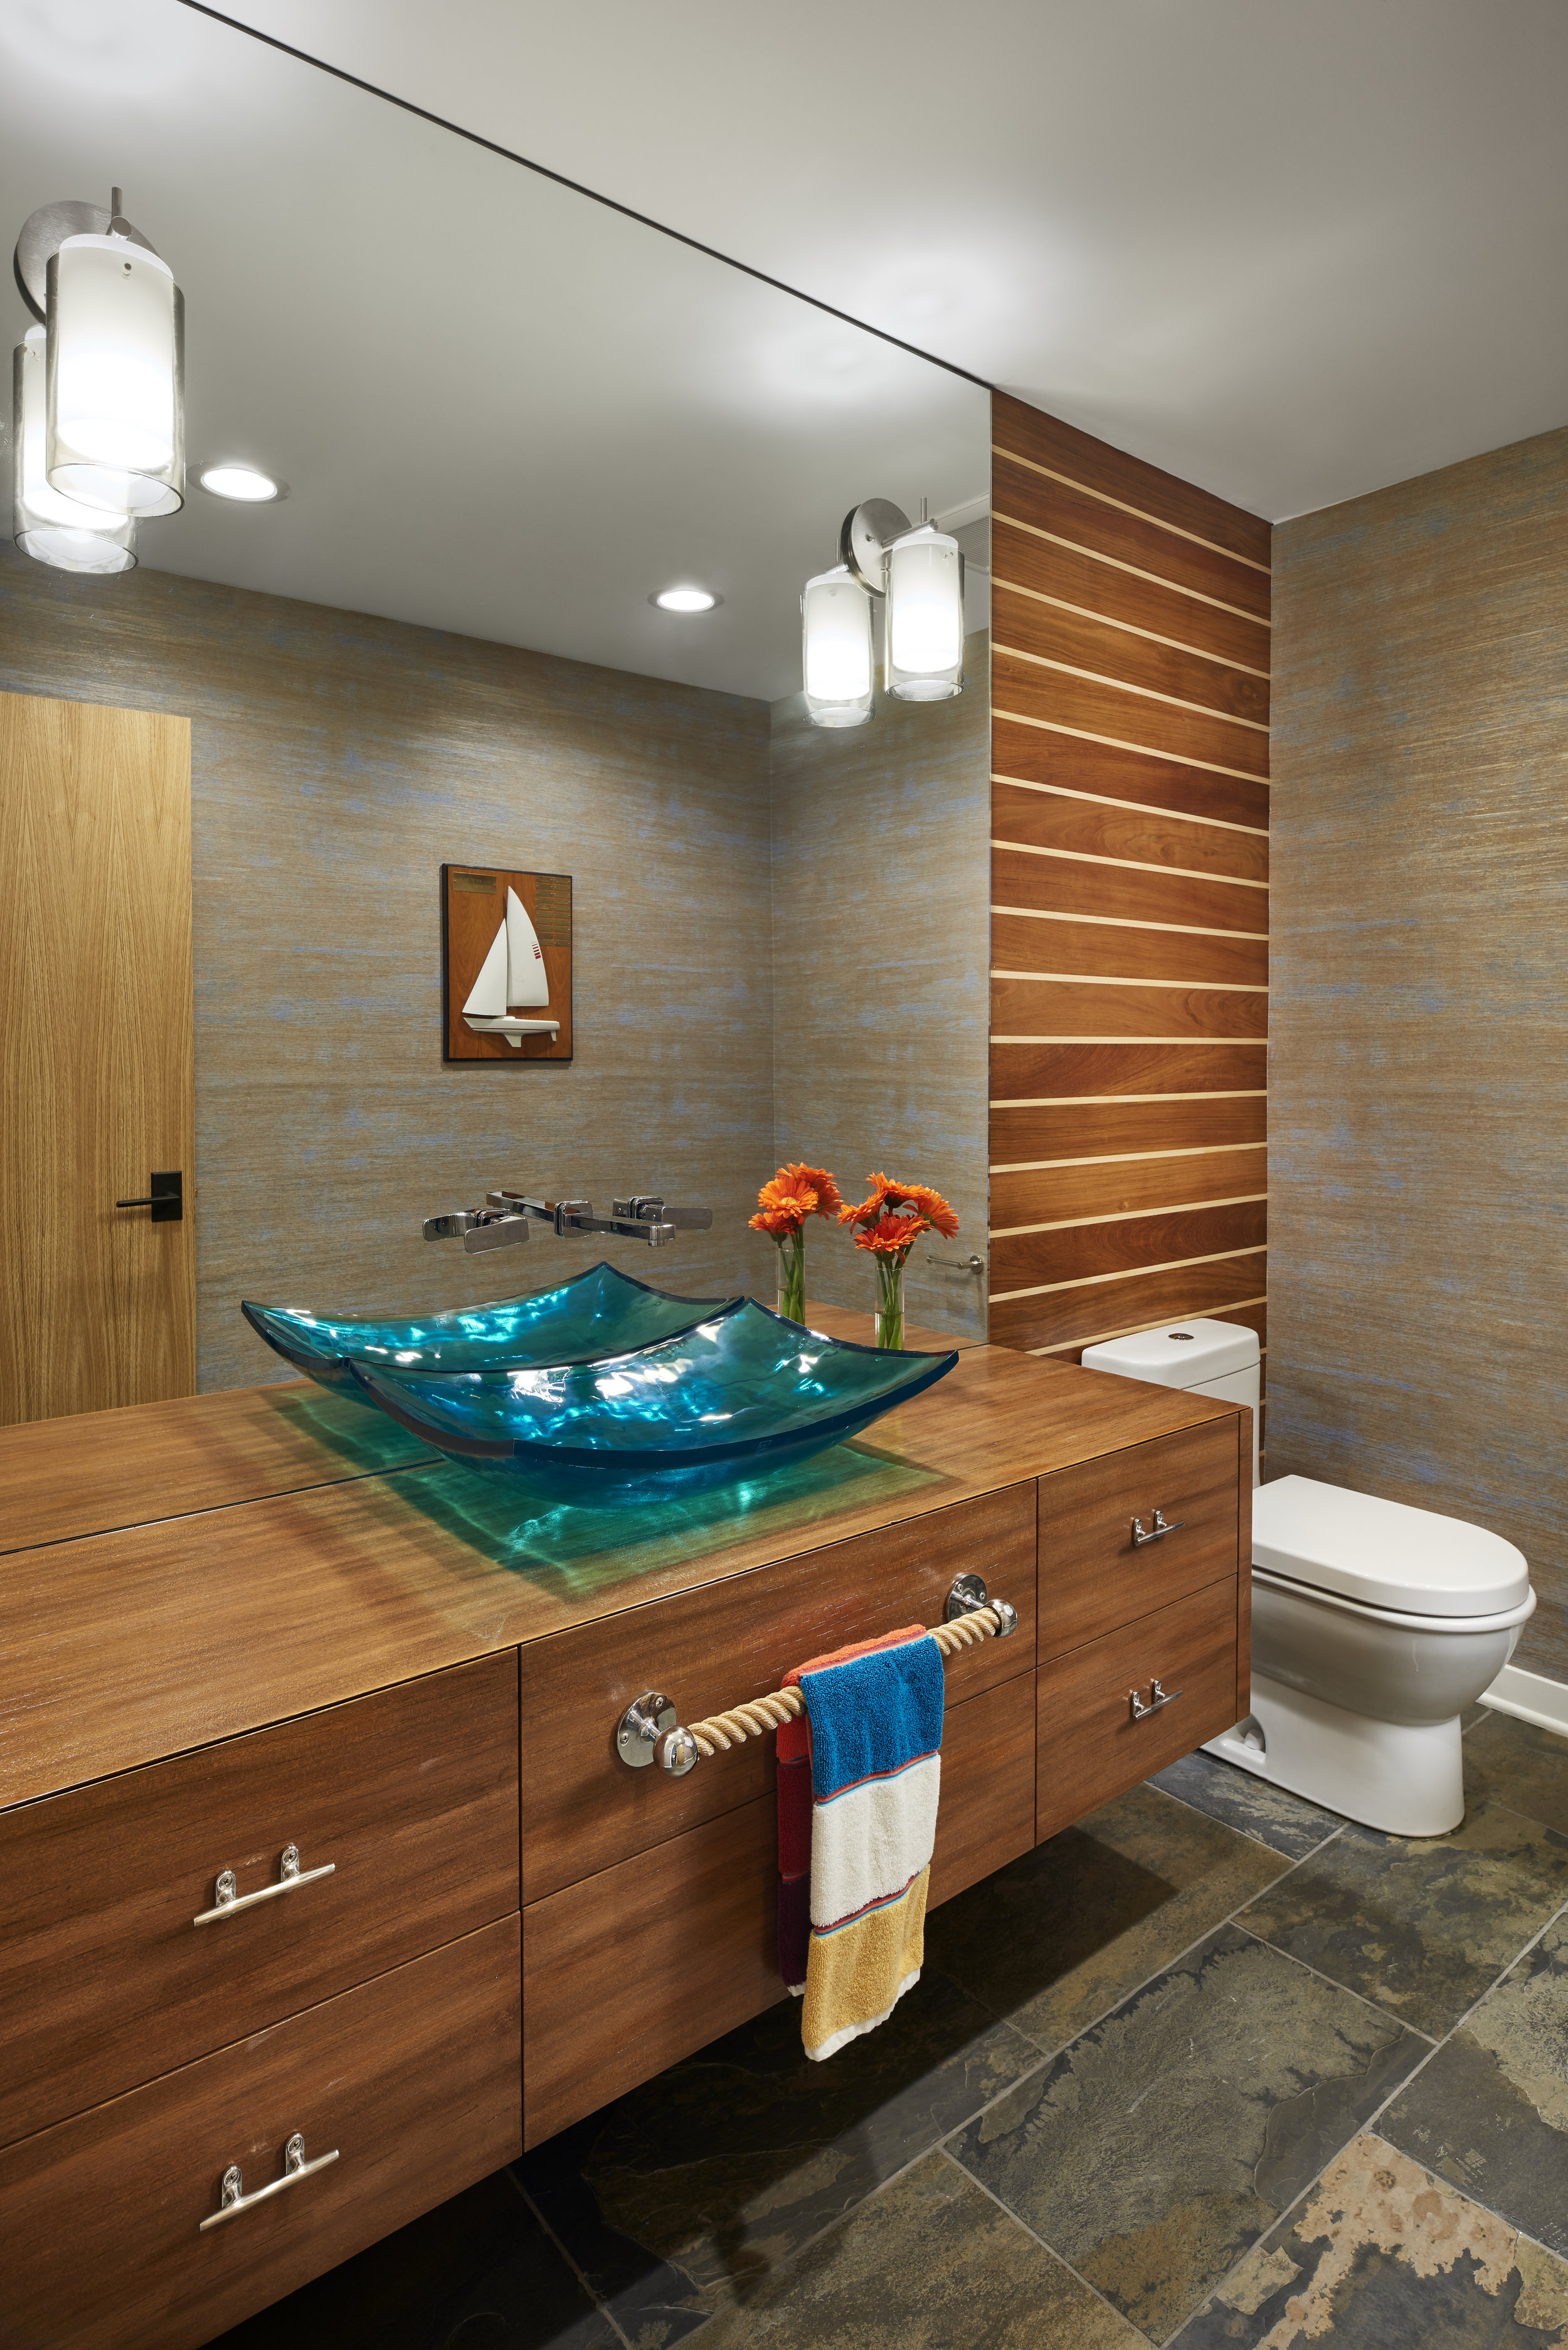 Nautical inspired bathroom, designed by NewStudio Architecture